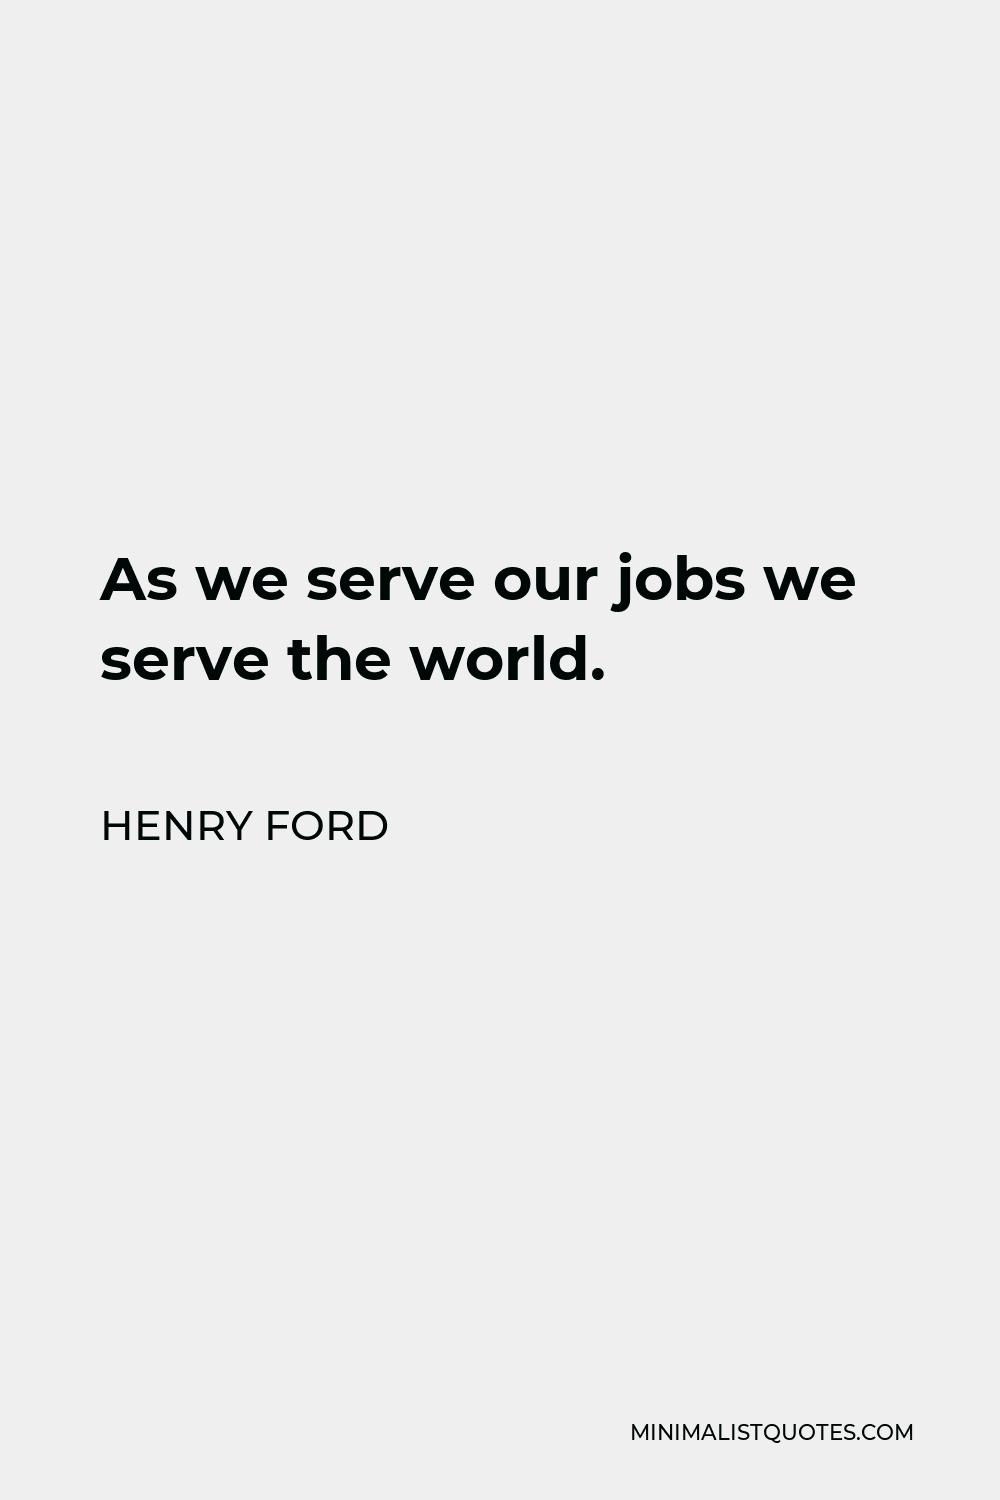 Henry Ford Quote - As we serve our jobs we serve the world.